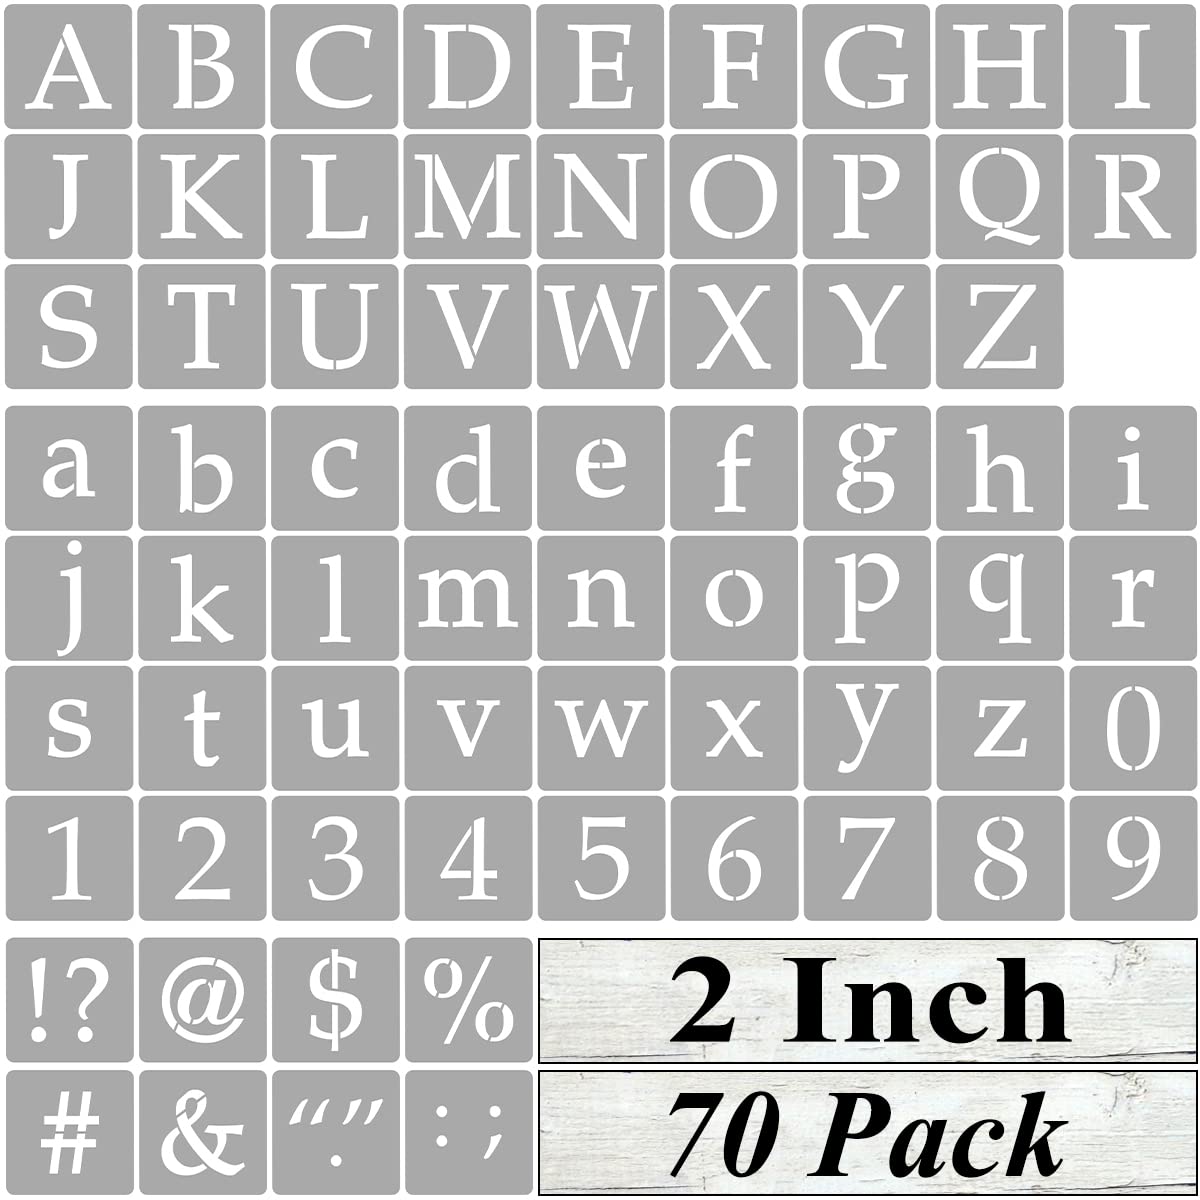 2 Inch Alphabet Letter Stencils for Painting - 70 Pack Letter and Number  Stencil Templates with Signs for Painting on Wood, Reusable Letters and  Numbers Stencils for Chalkboard Wood Signs & Wall Art